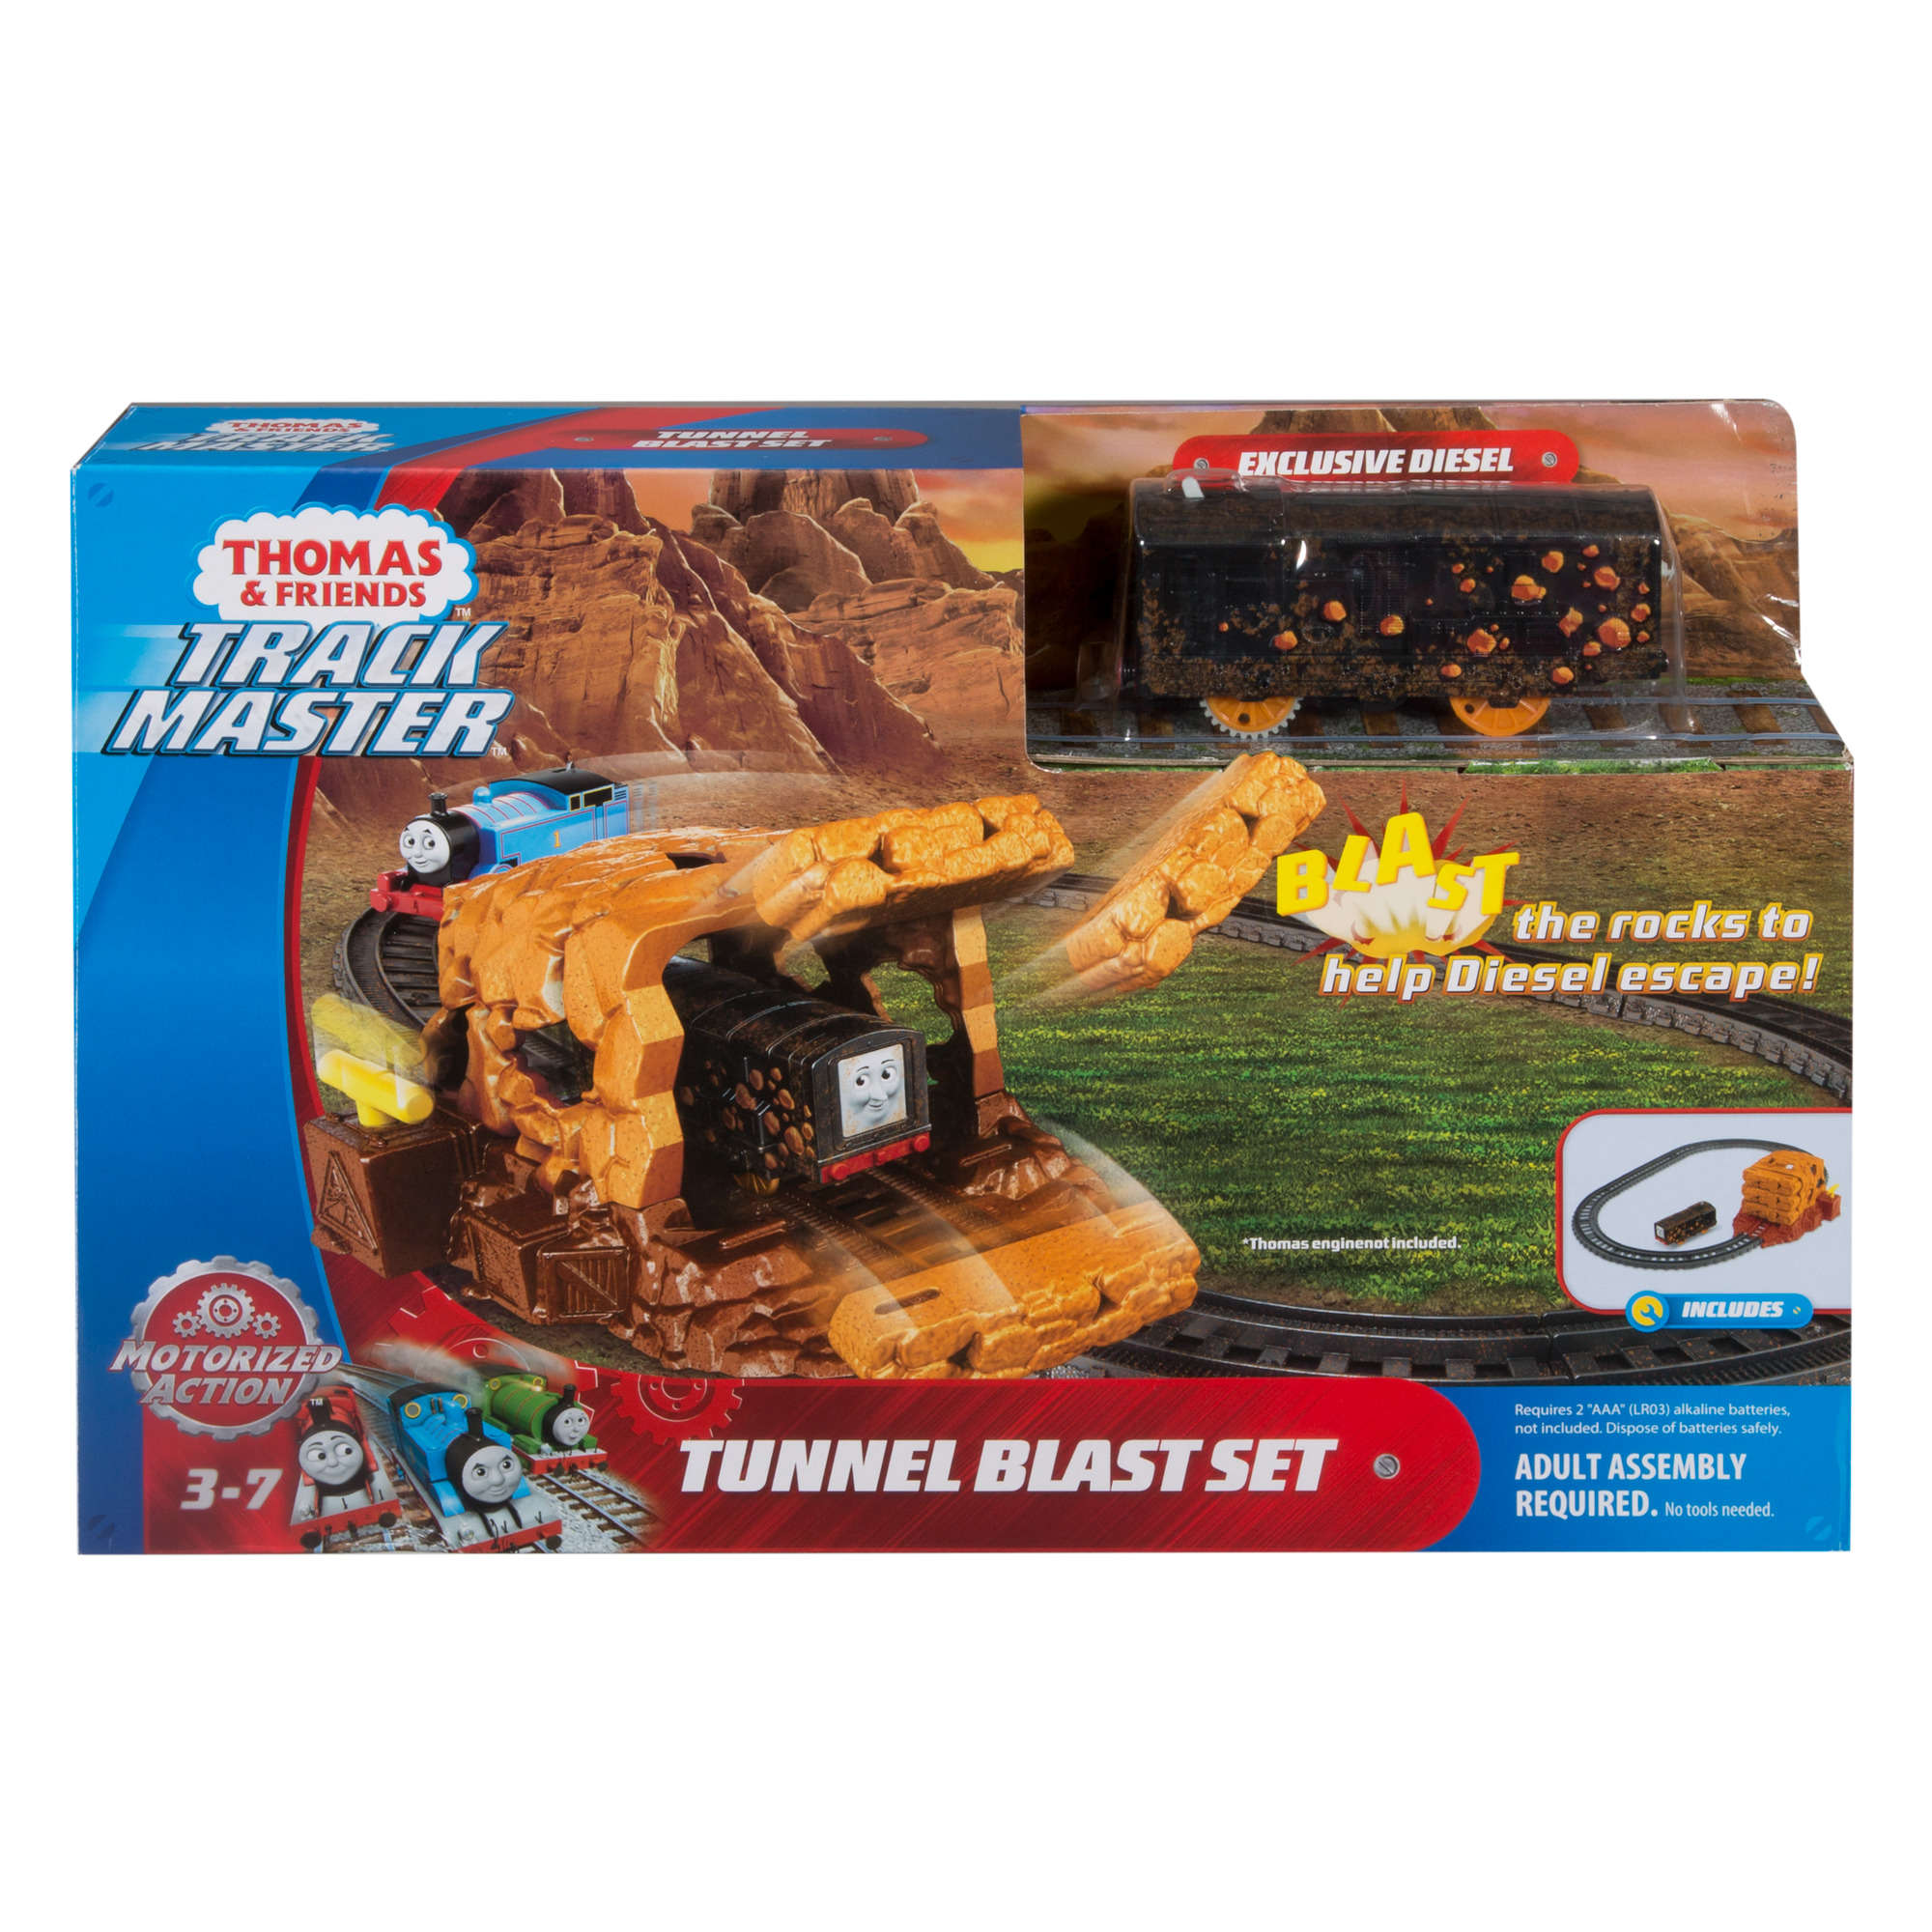 Thomas & Friends TrackMaster Tunnel Blast Set with Exclusive Motorized Diesel Train Engine - image 4 of 10